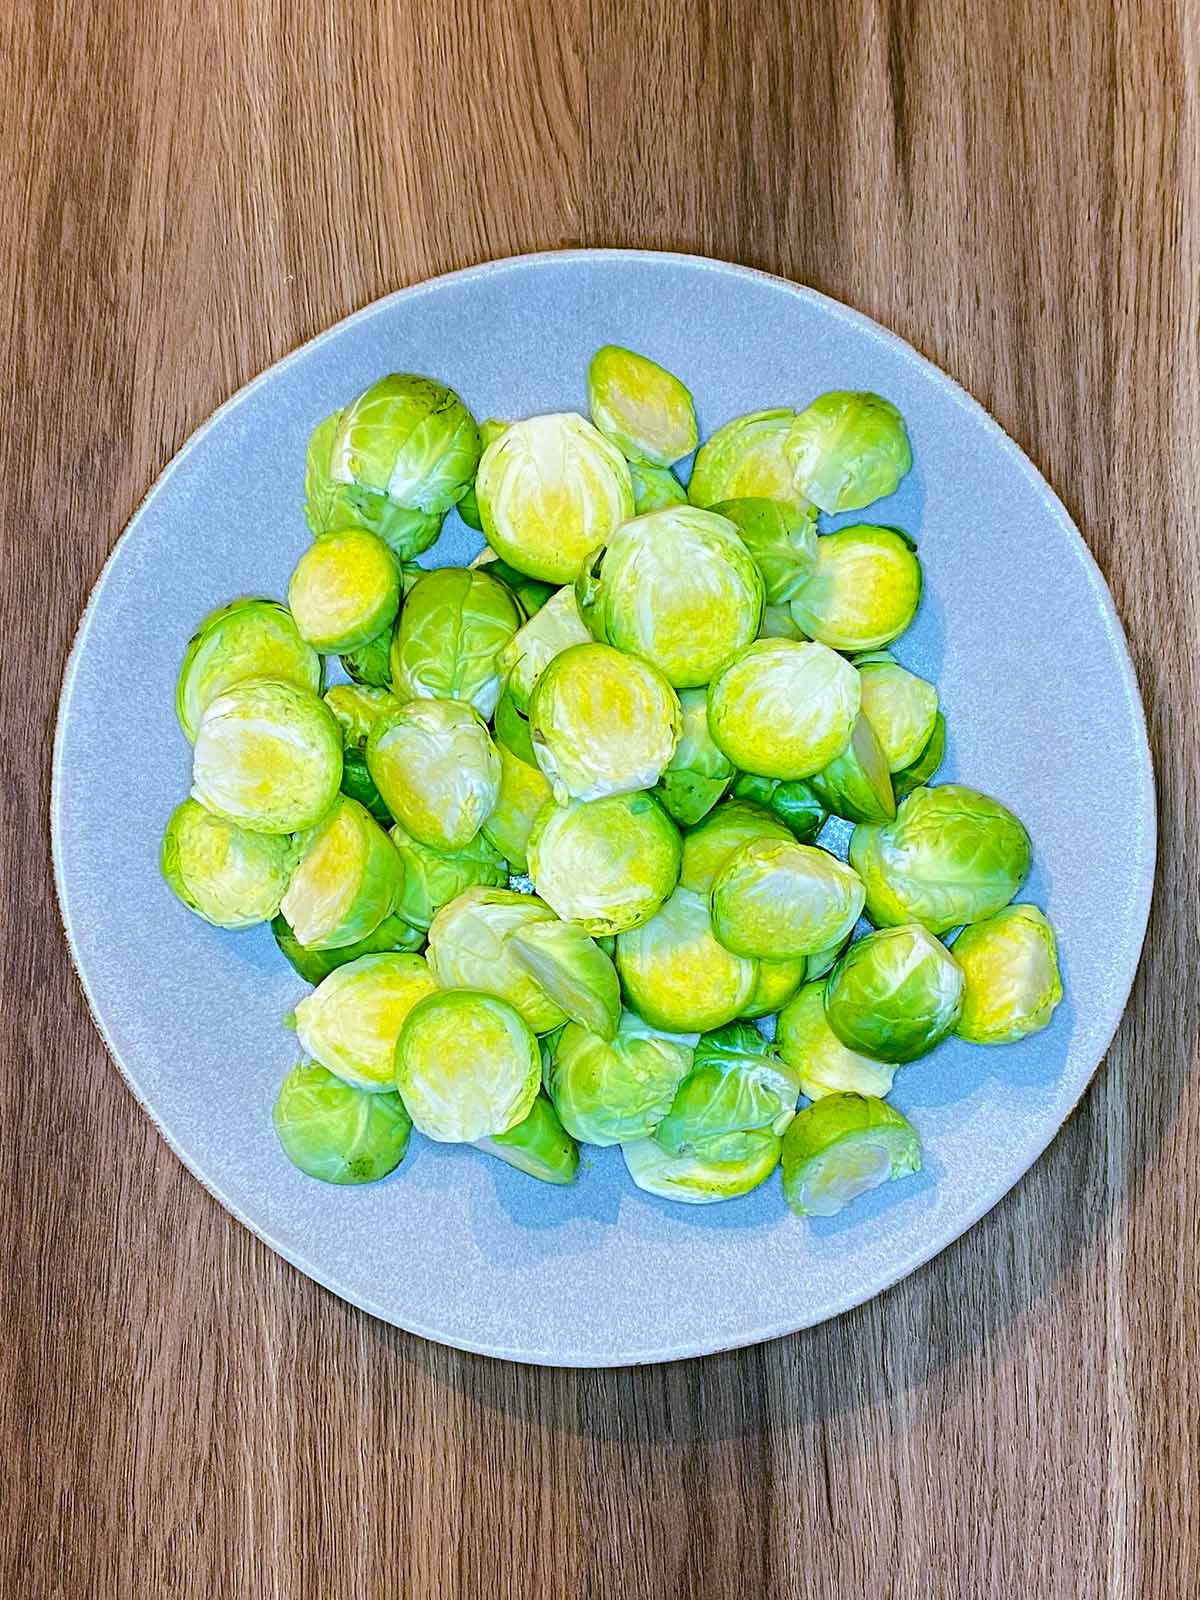 A plate of halved Brussels sprouts.